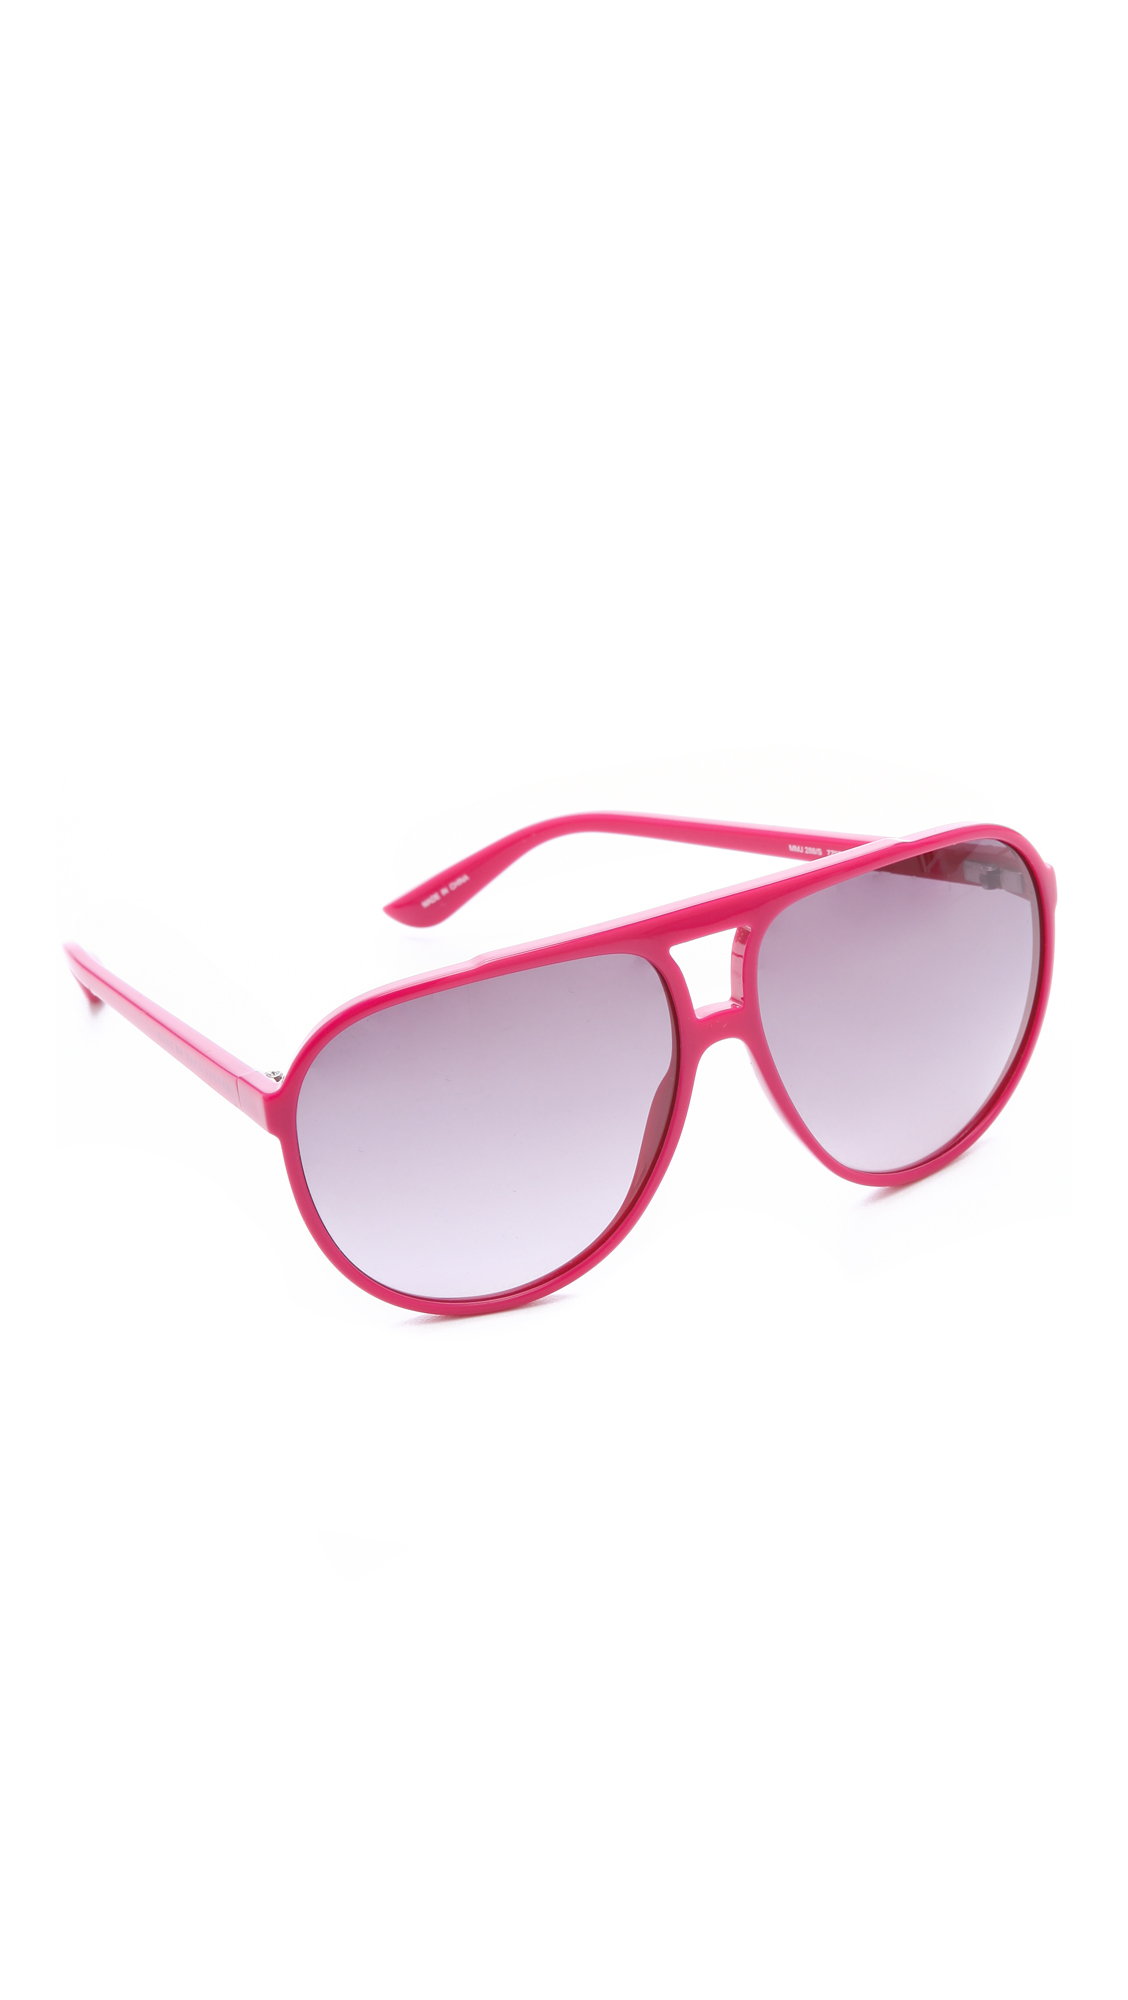 Marc By Marc Jacobs Oversized Plastic Aviator Sunglasses in Pink - Lyst